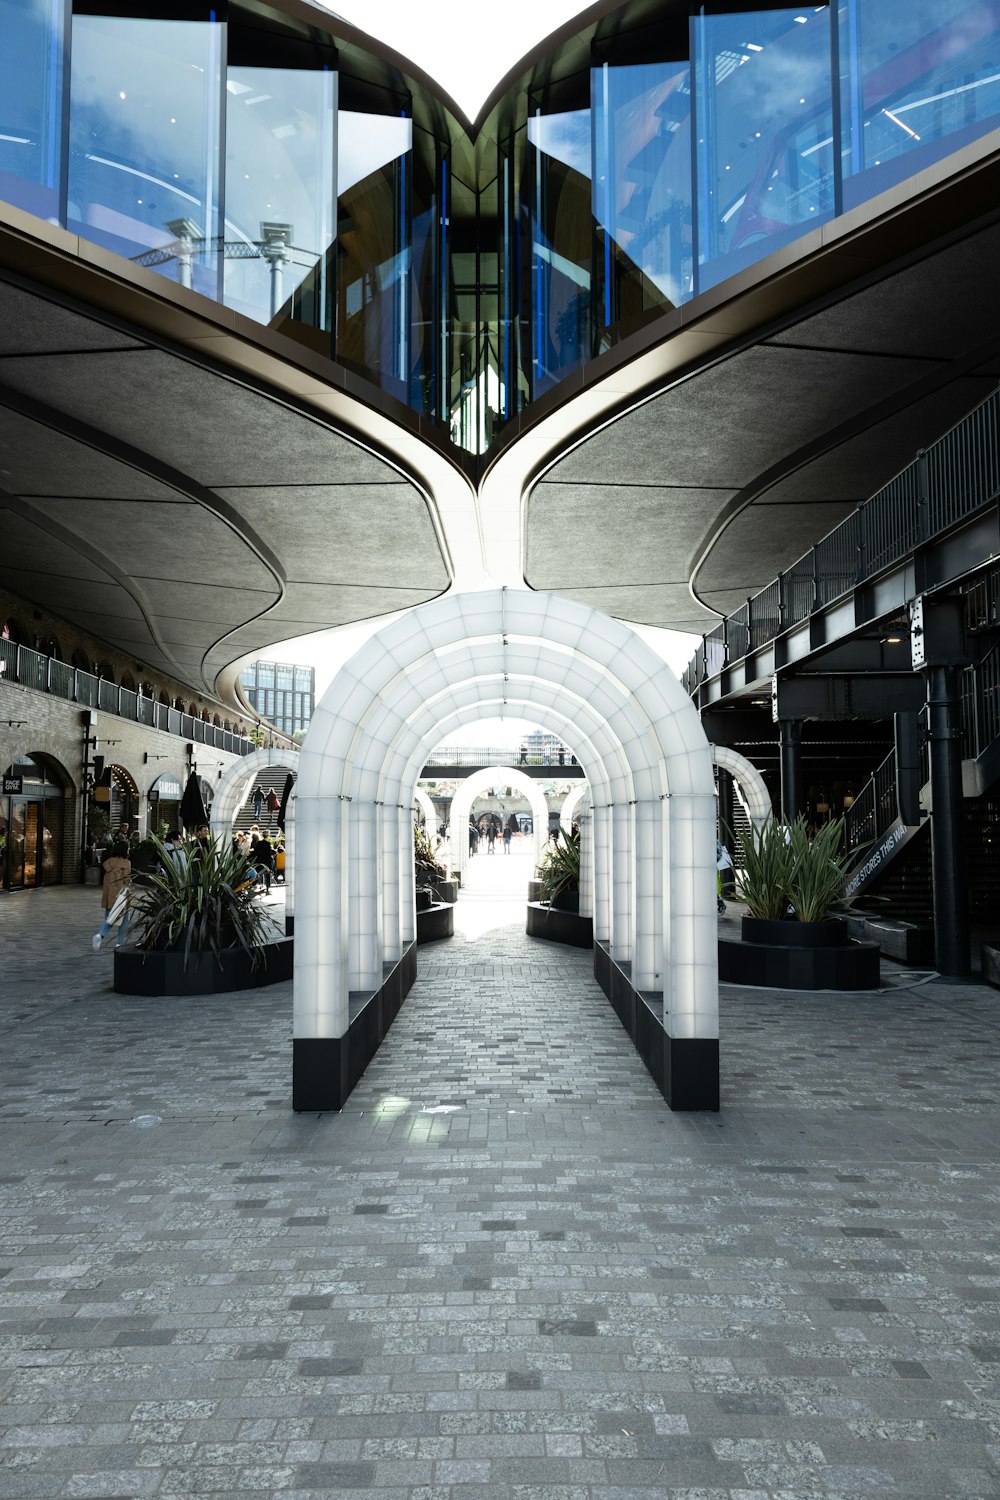 a walkway in a shopping center with a curved walkway